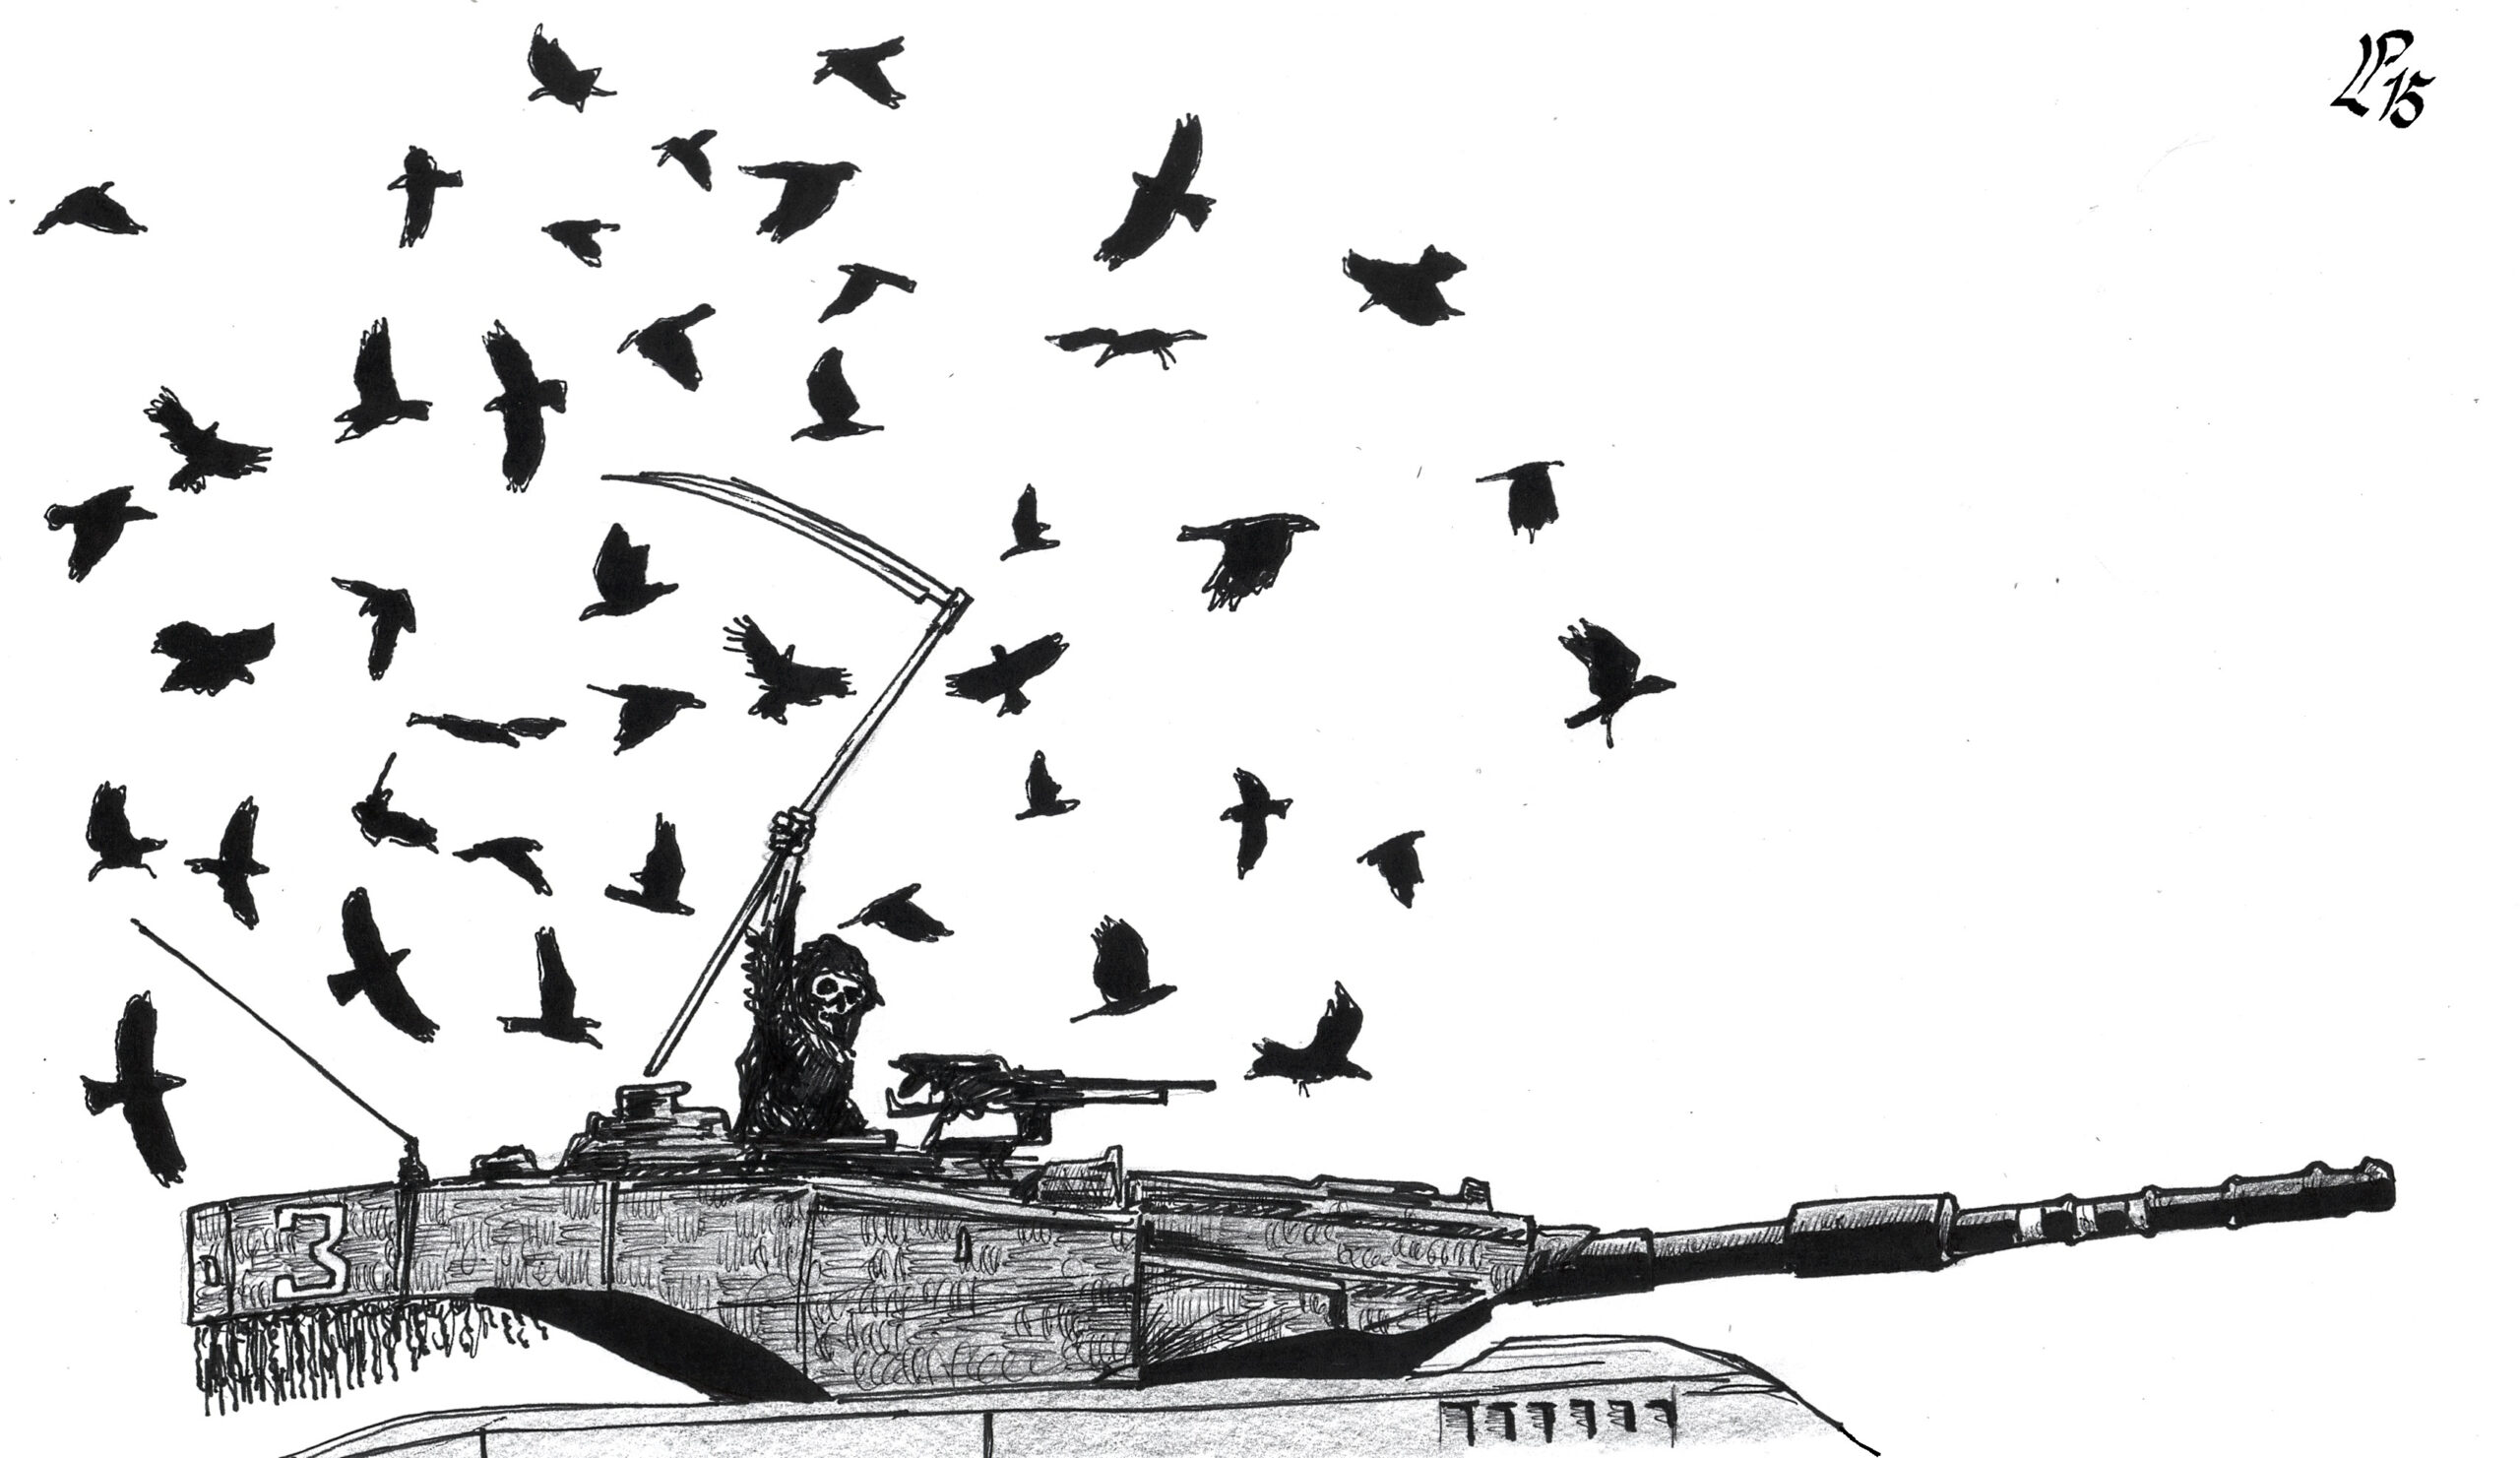 Black and white sketch of a skeleton with a scythe in a tank, surrounded by black birds.